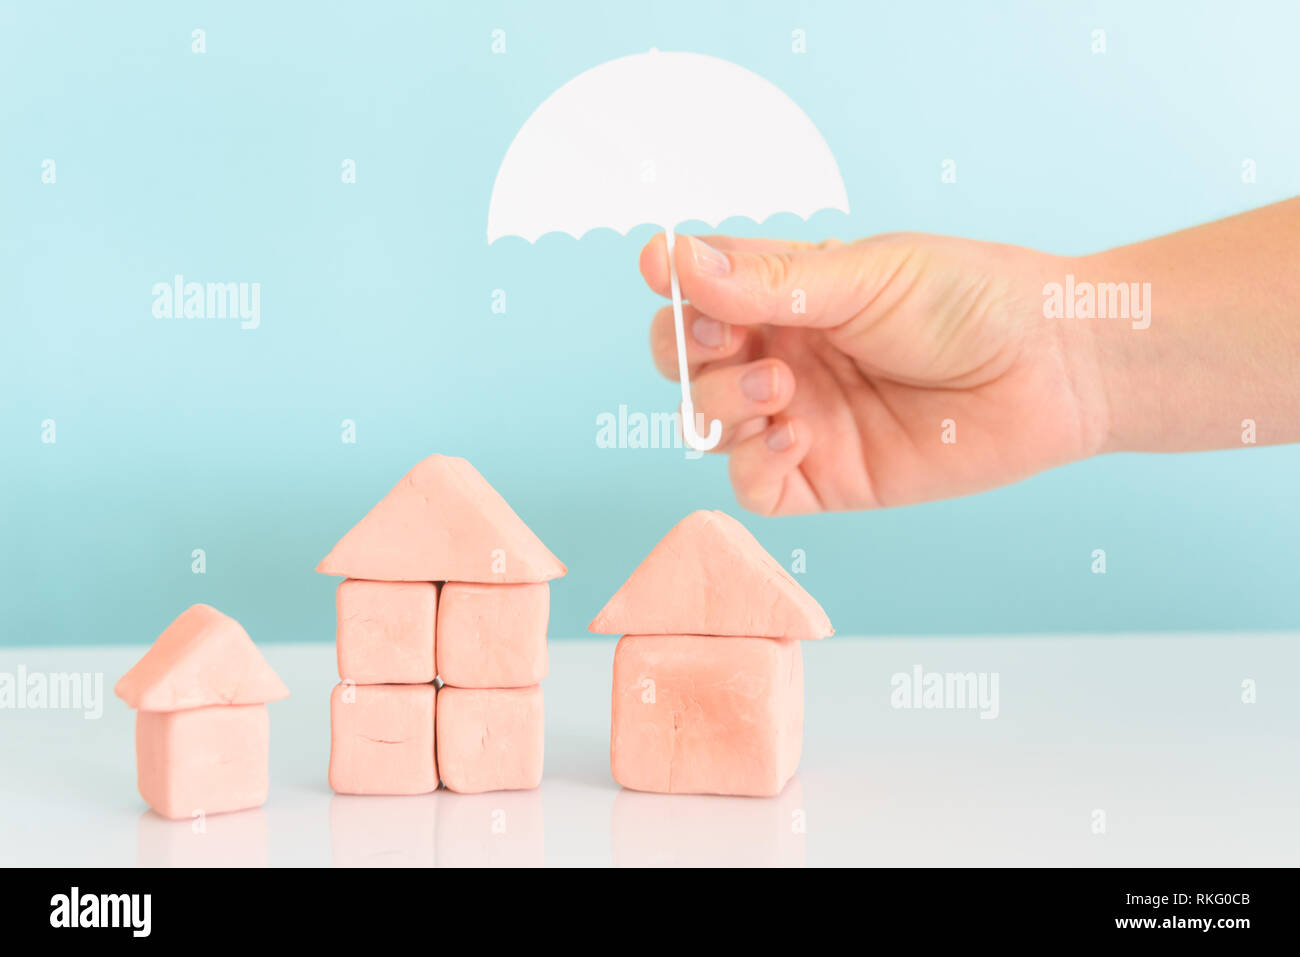 Hand holding an umbrella over a house, concept of security and insurance of property Stock Photo